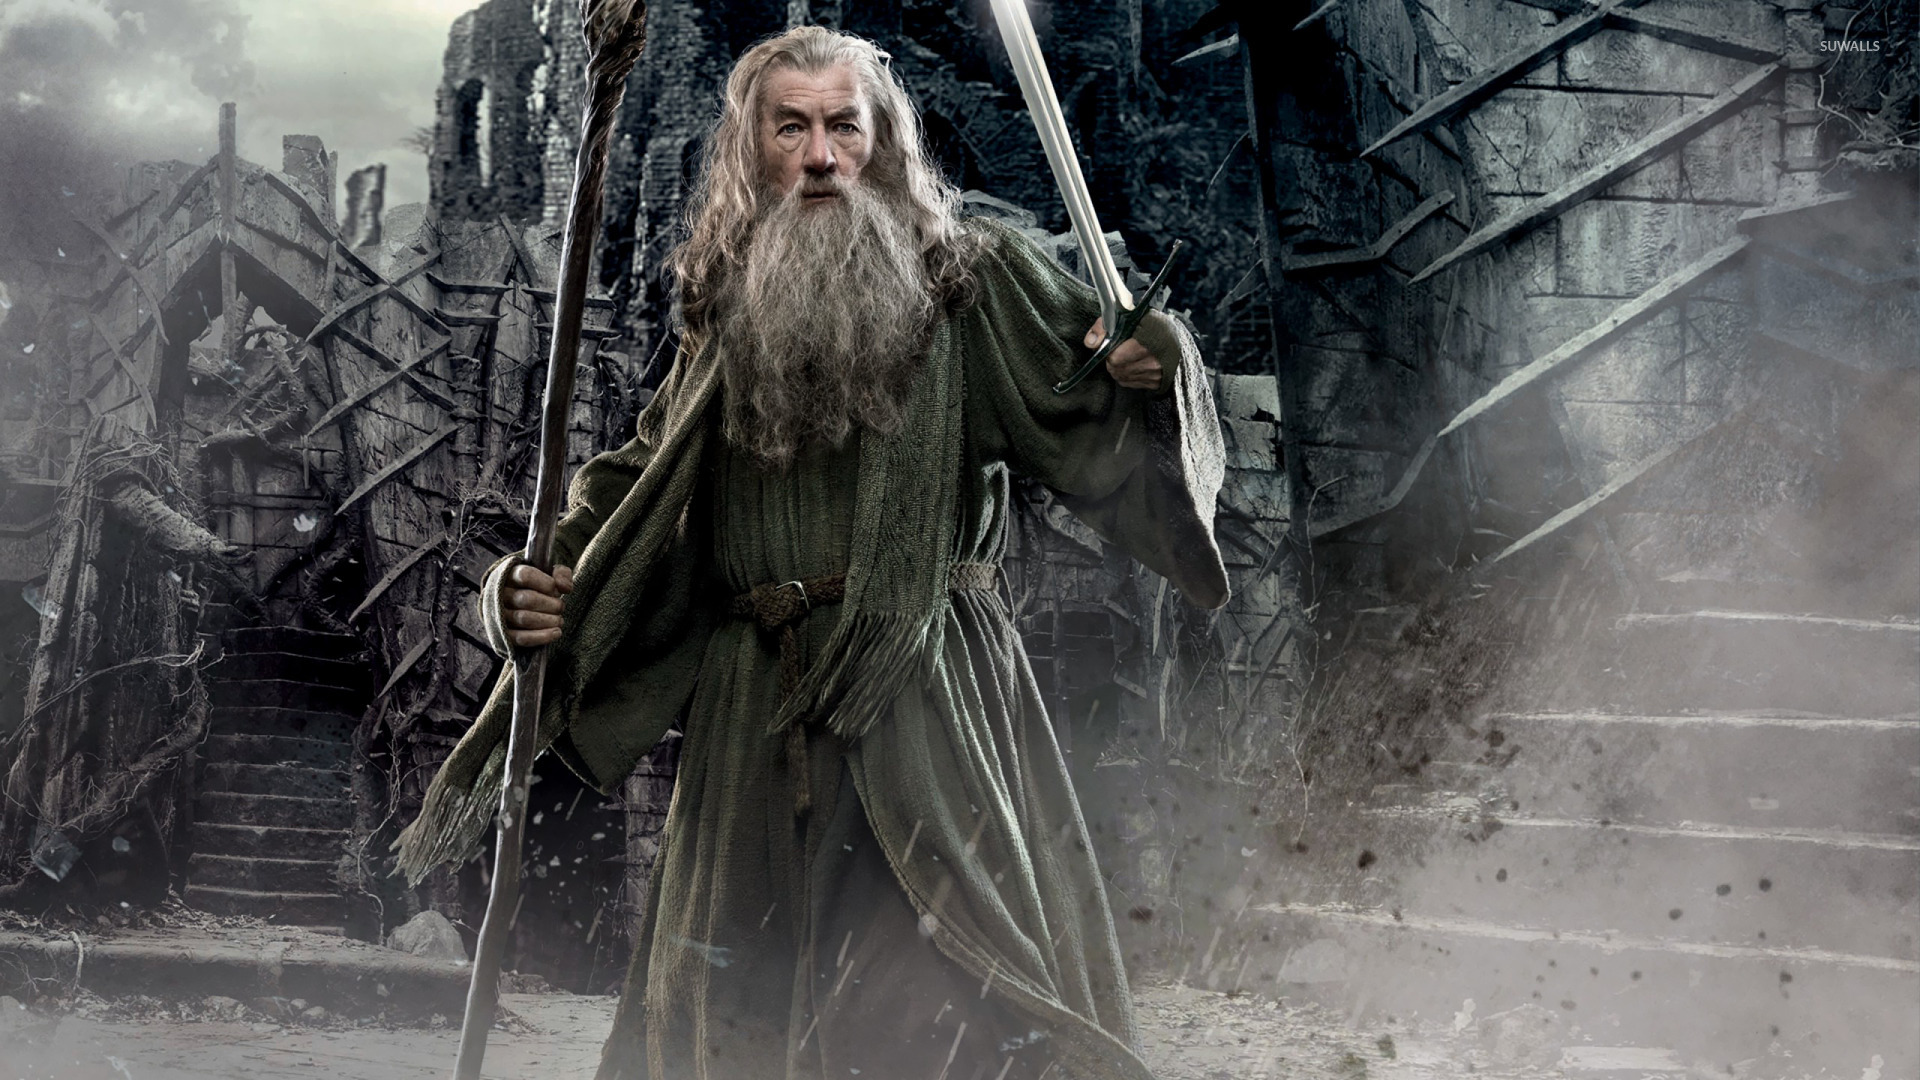 Council of Elrond » Download Categories » Gandalf